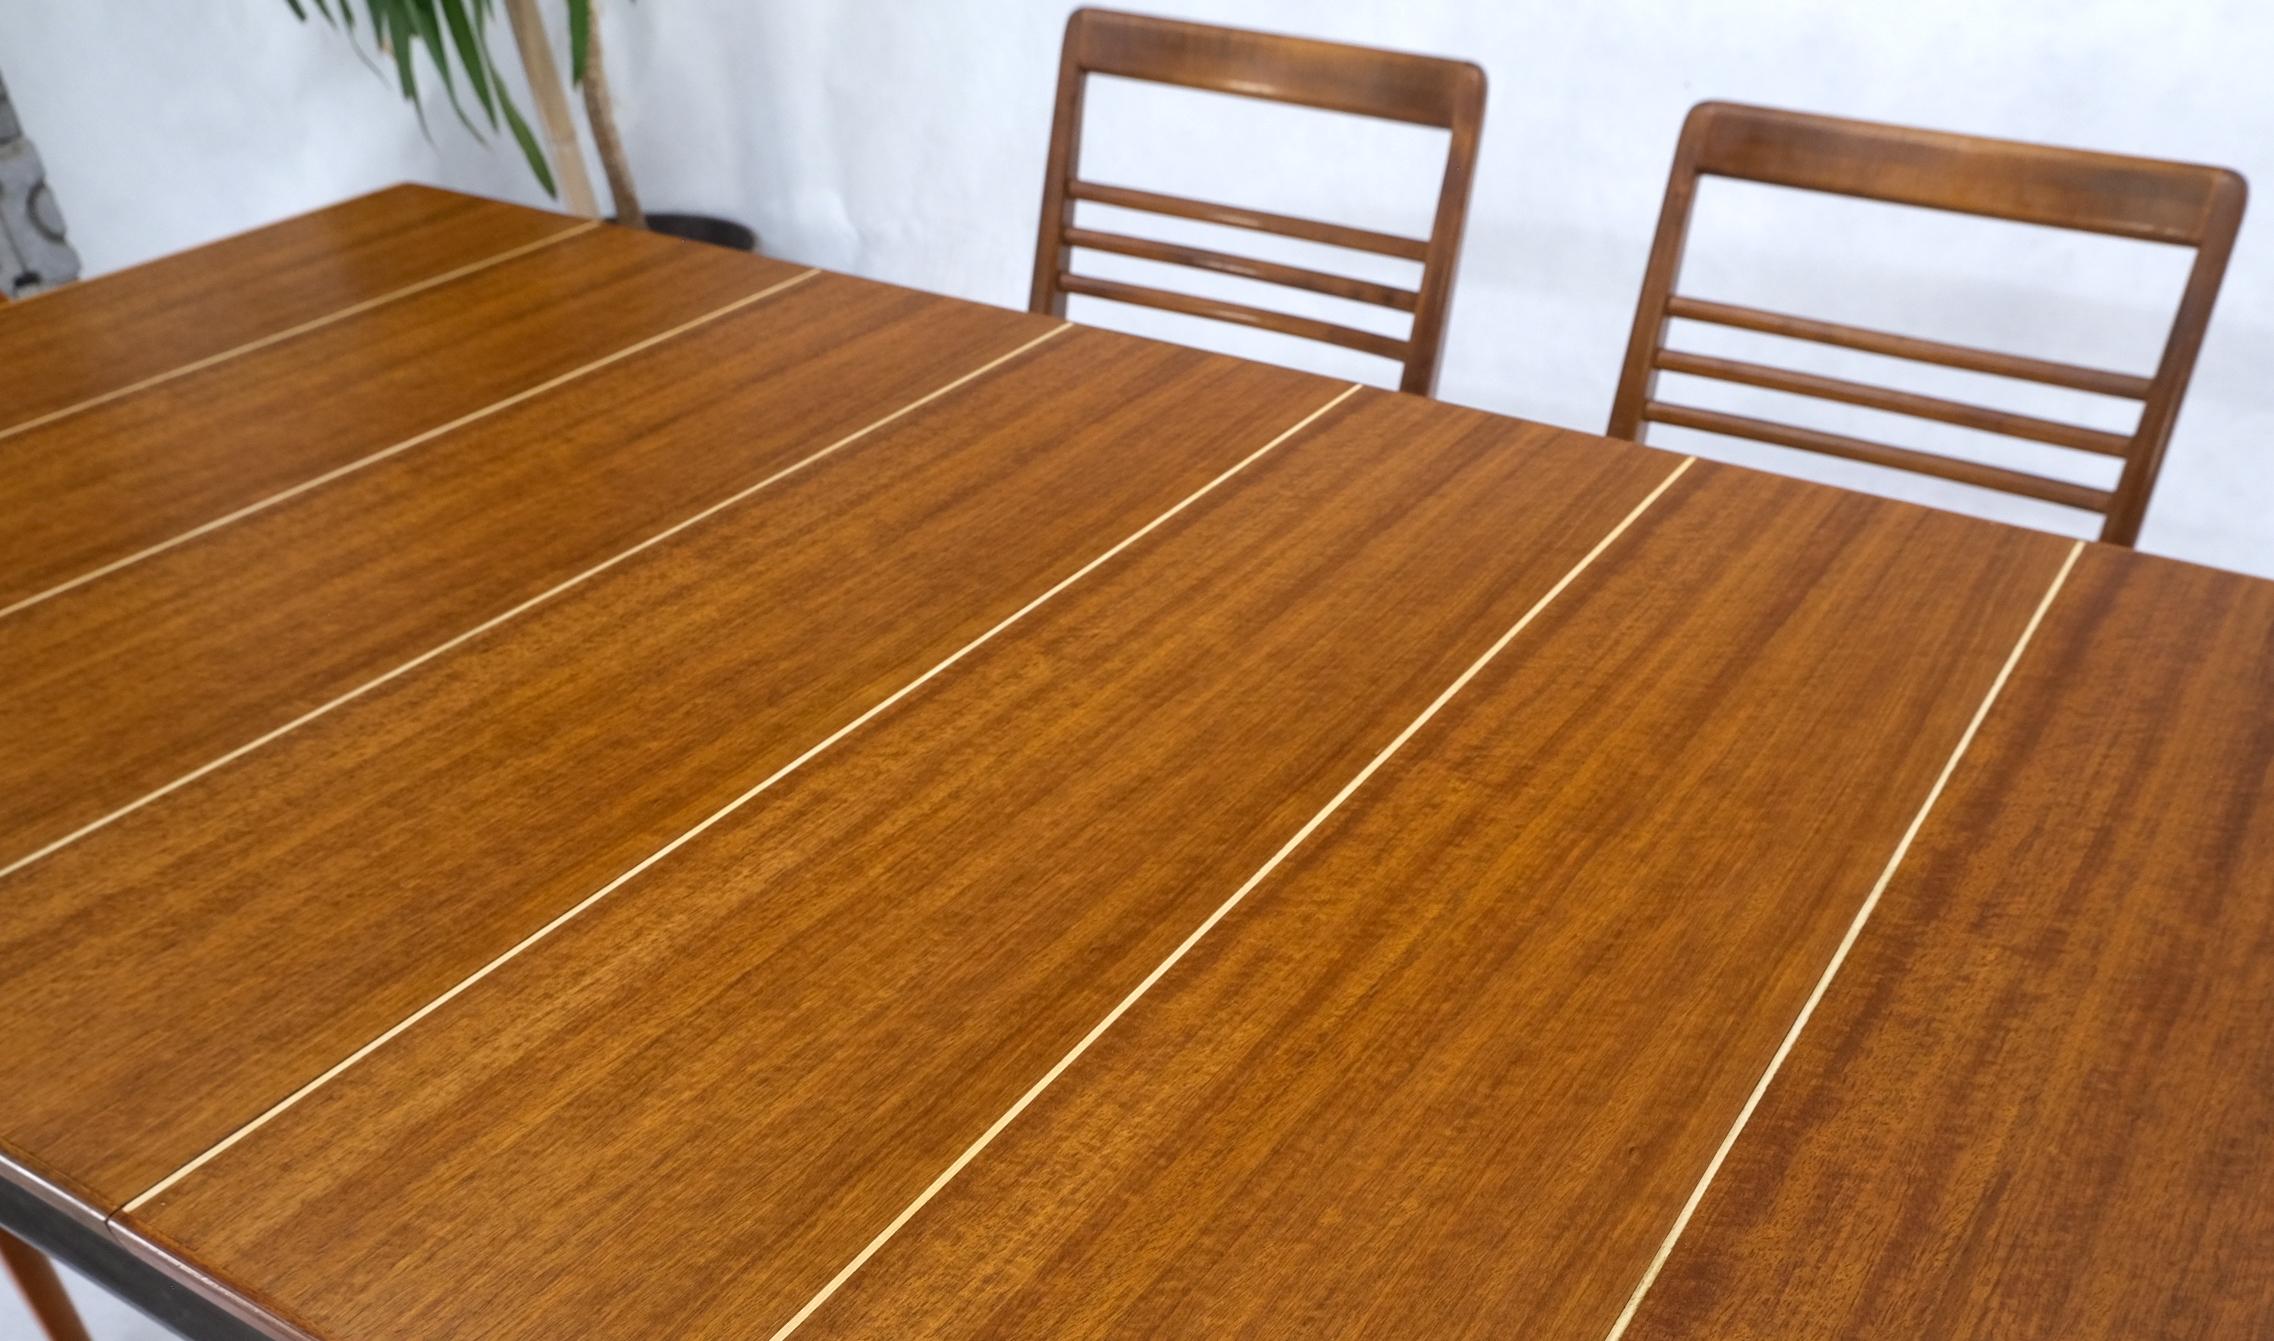 Birdseye Maple Italian Mid-Century Modern Dining Table 8 Chairs Set New Linen Upholstery Seats For Sale